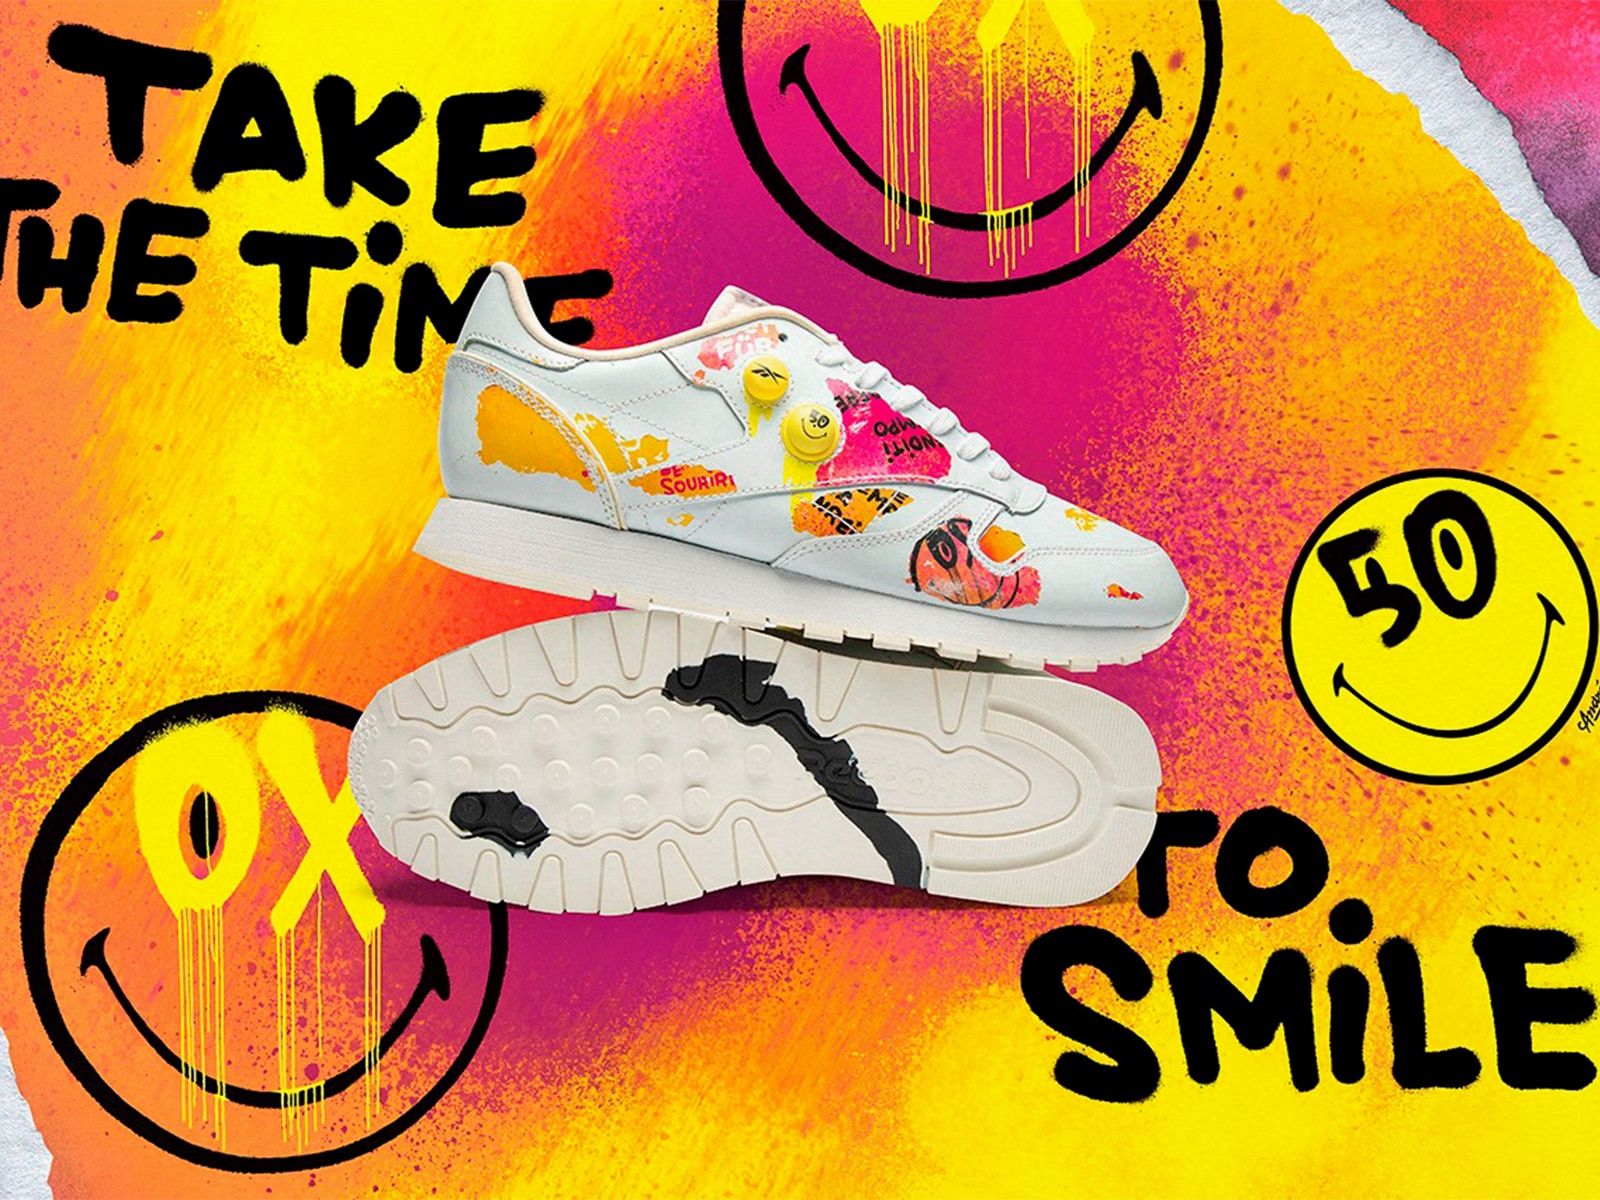 Smiley celebrates its 50th anniversary together with Reebok